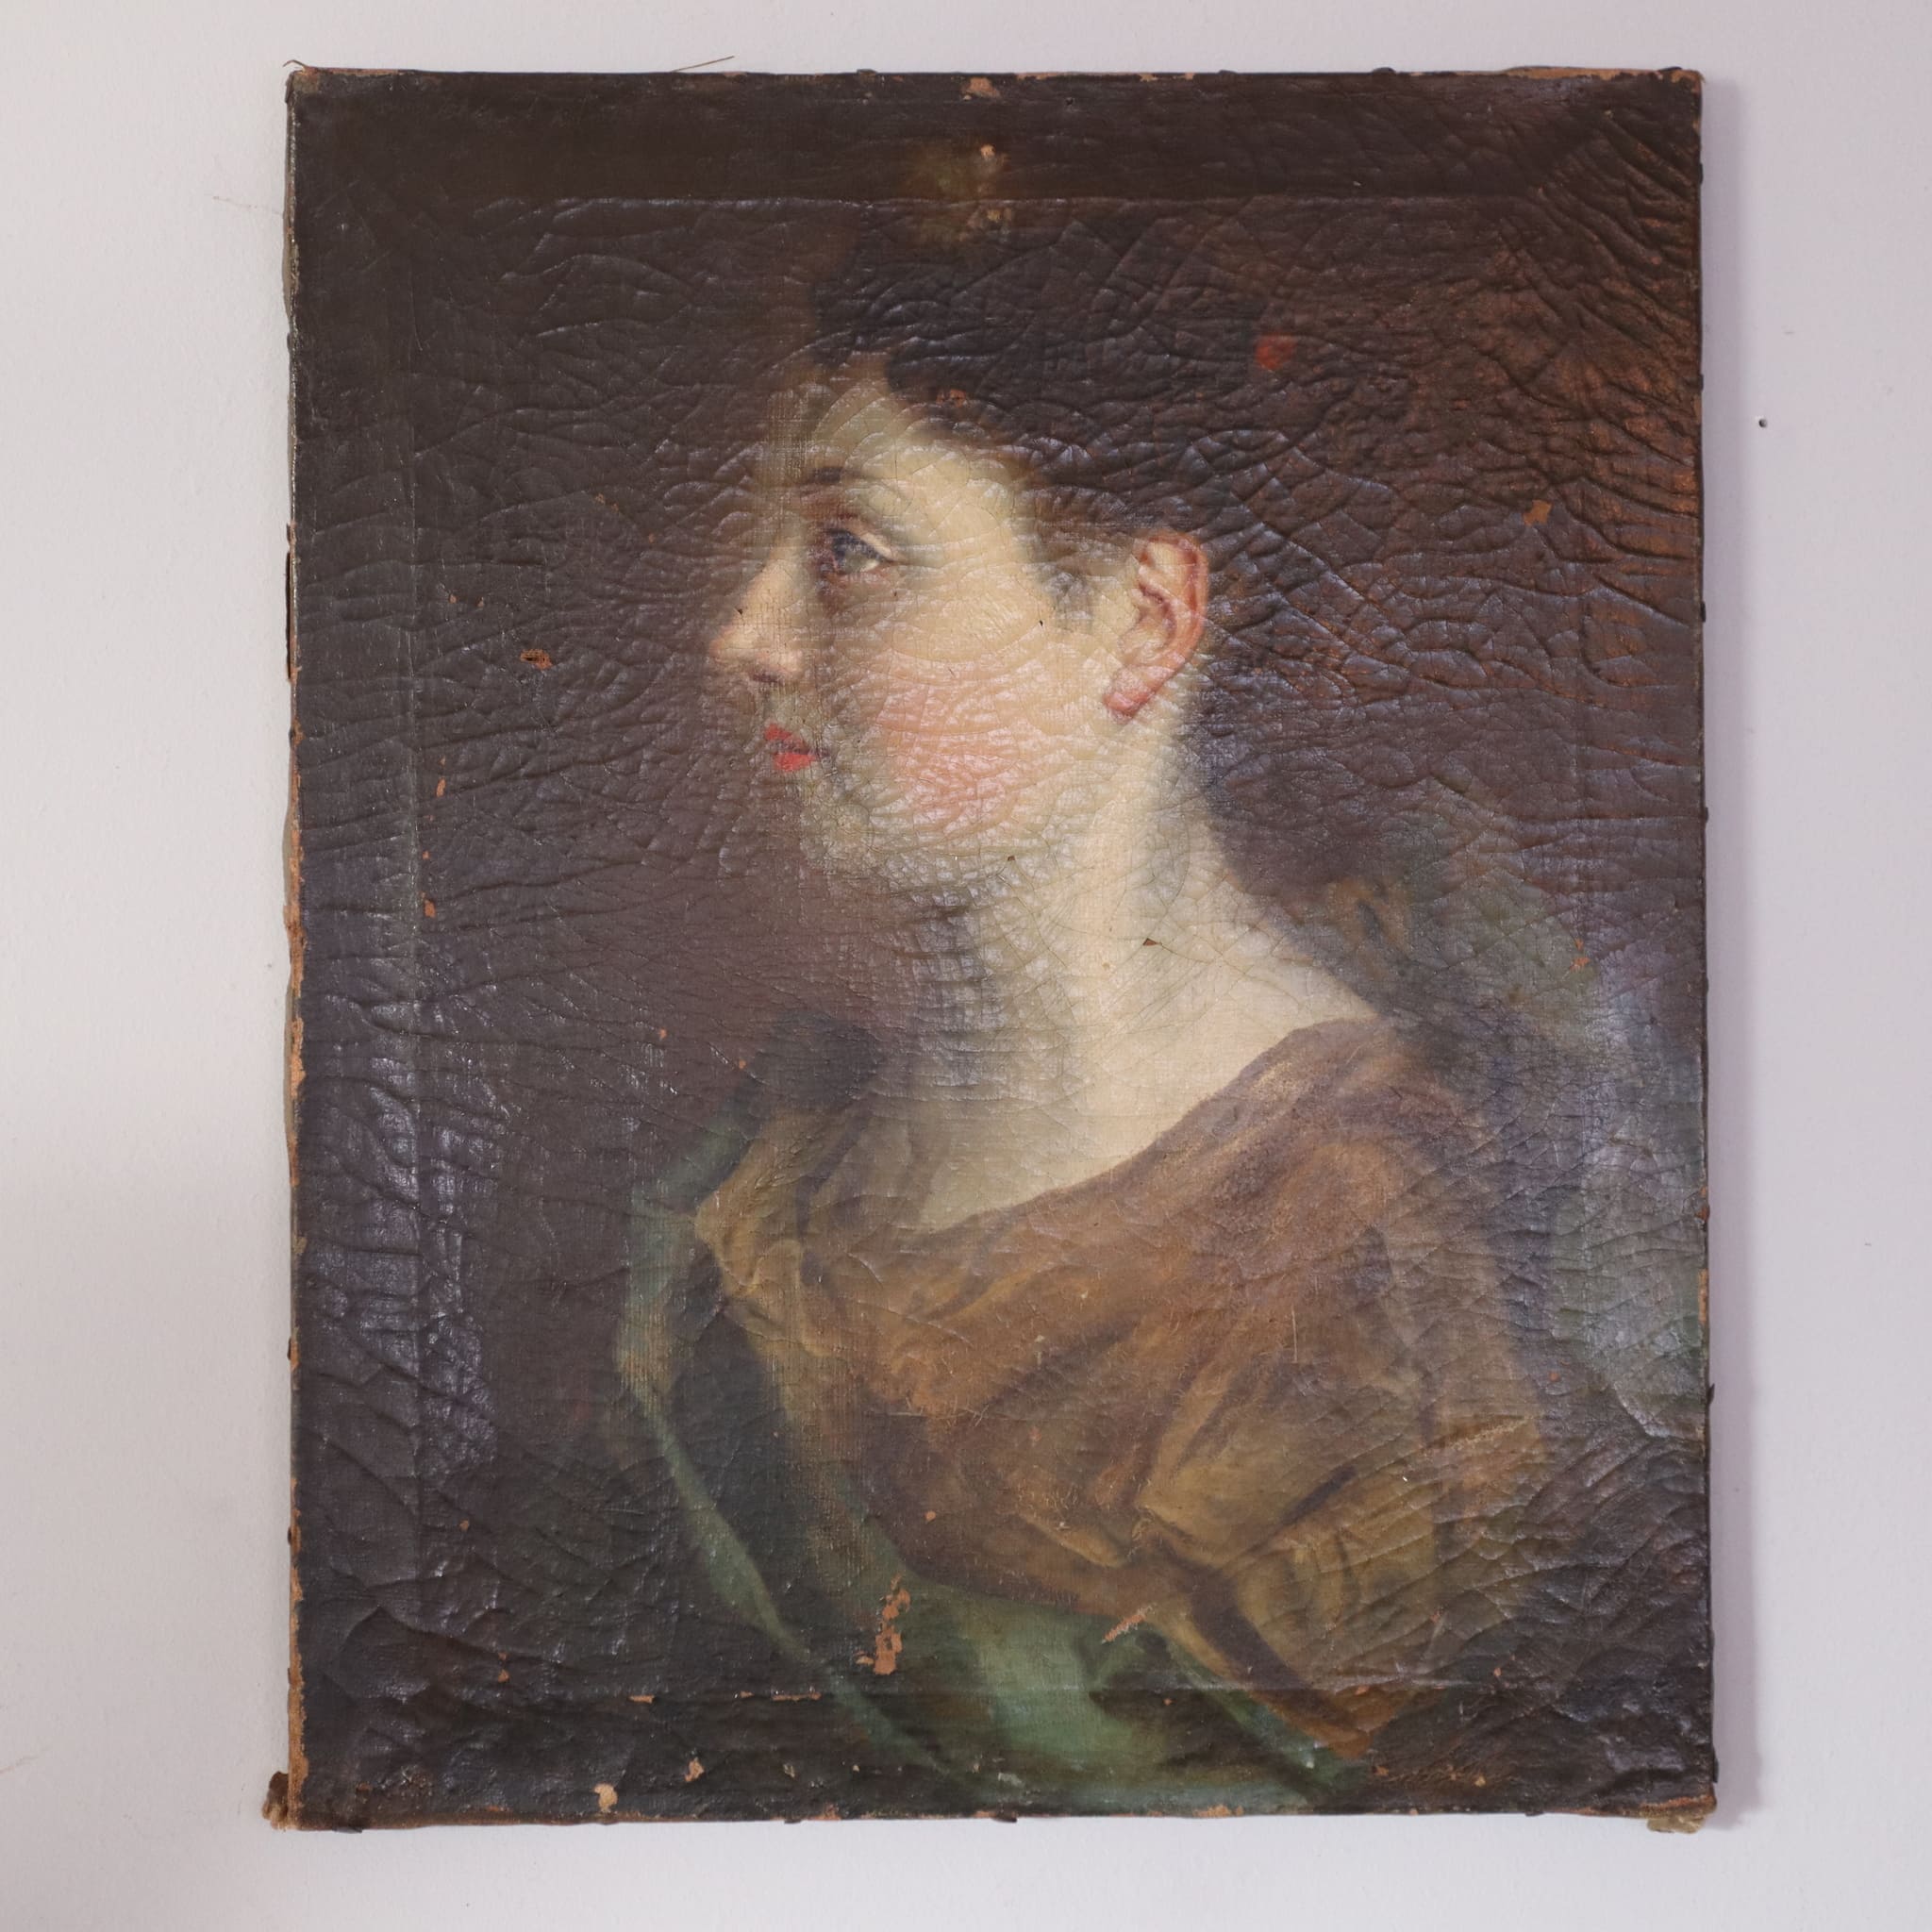 visionidepoca-antique-antique-painting-oil-on-canvas-french-noble-woman-made-in-france-from-1700-front-view